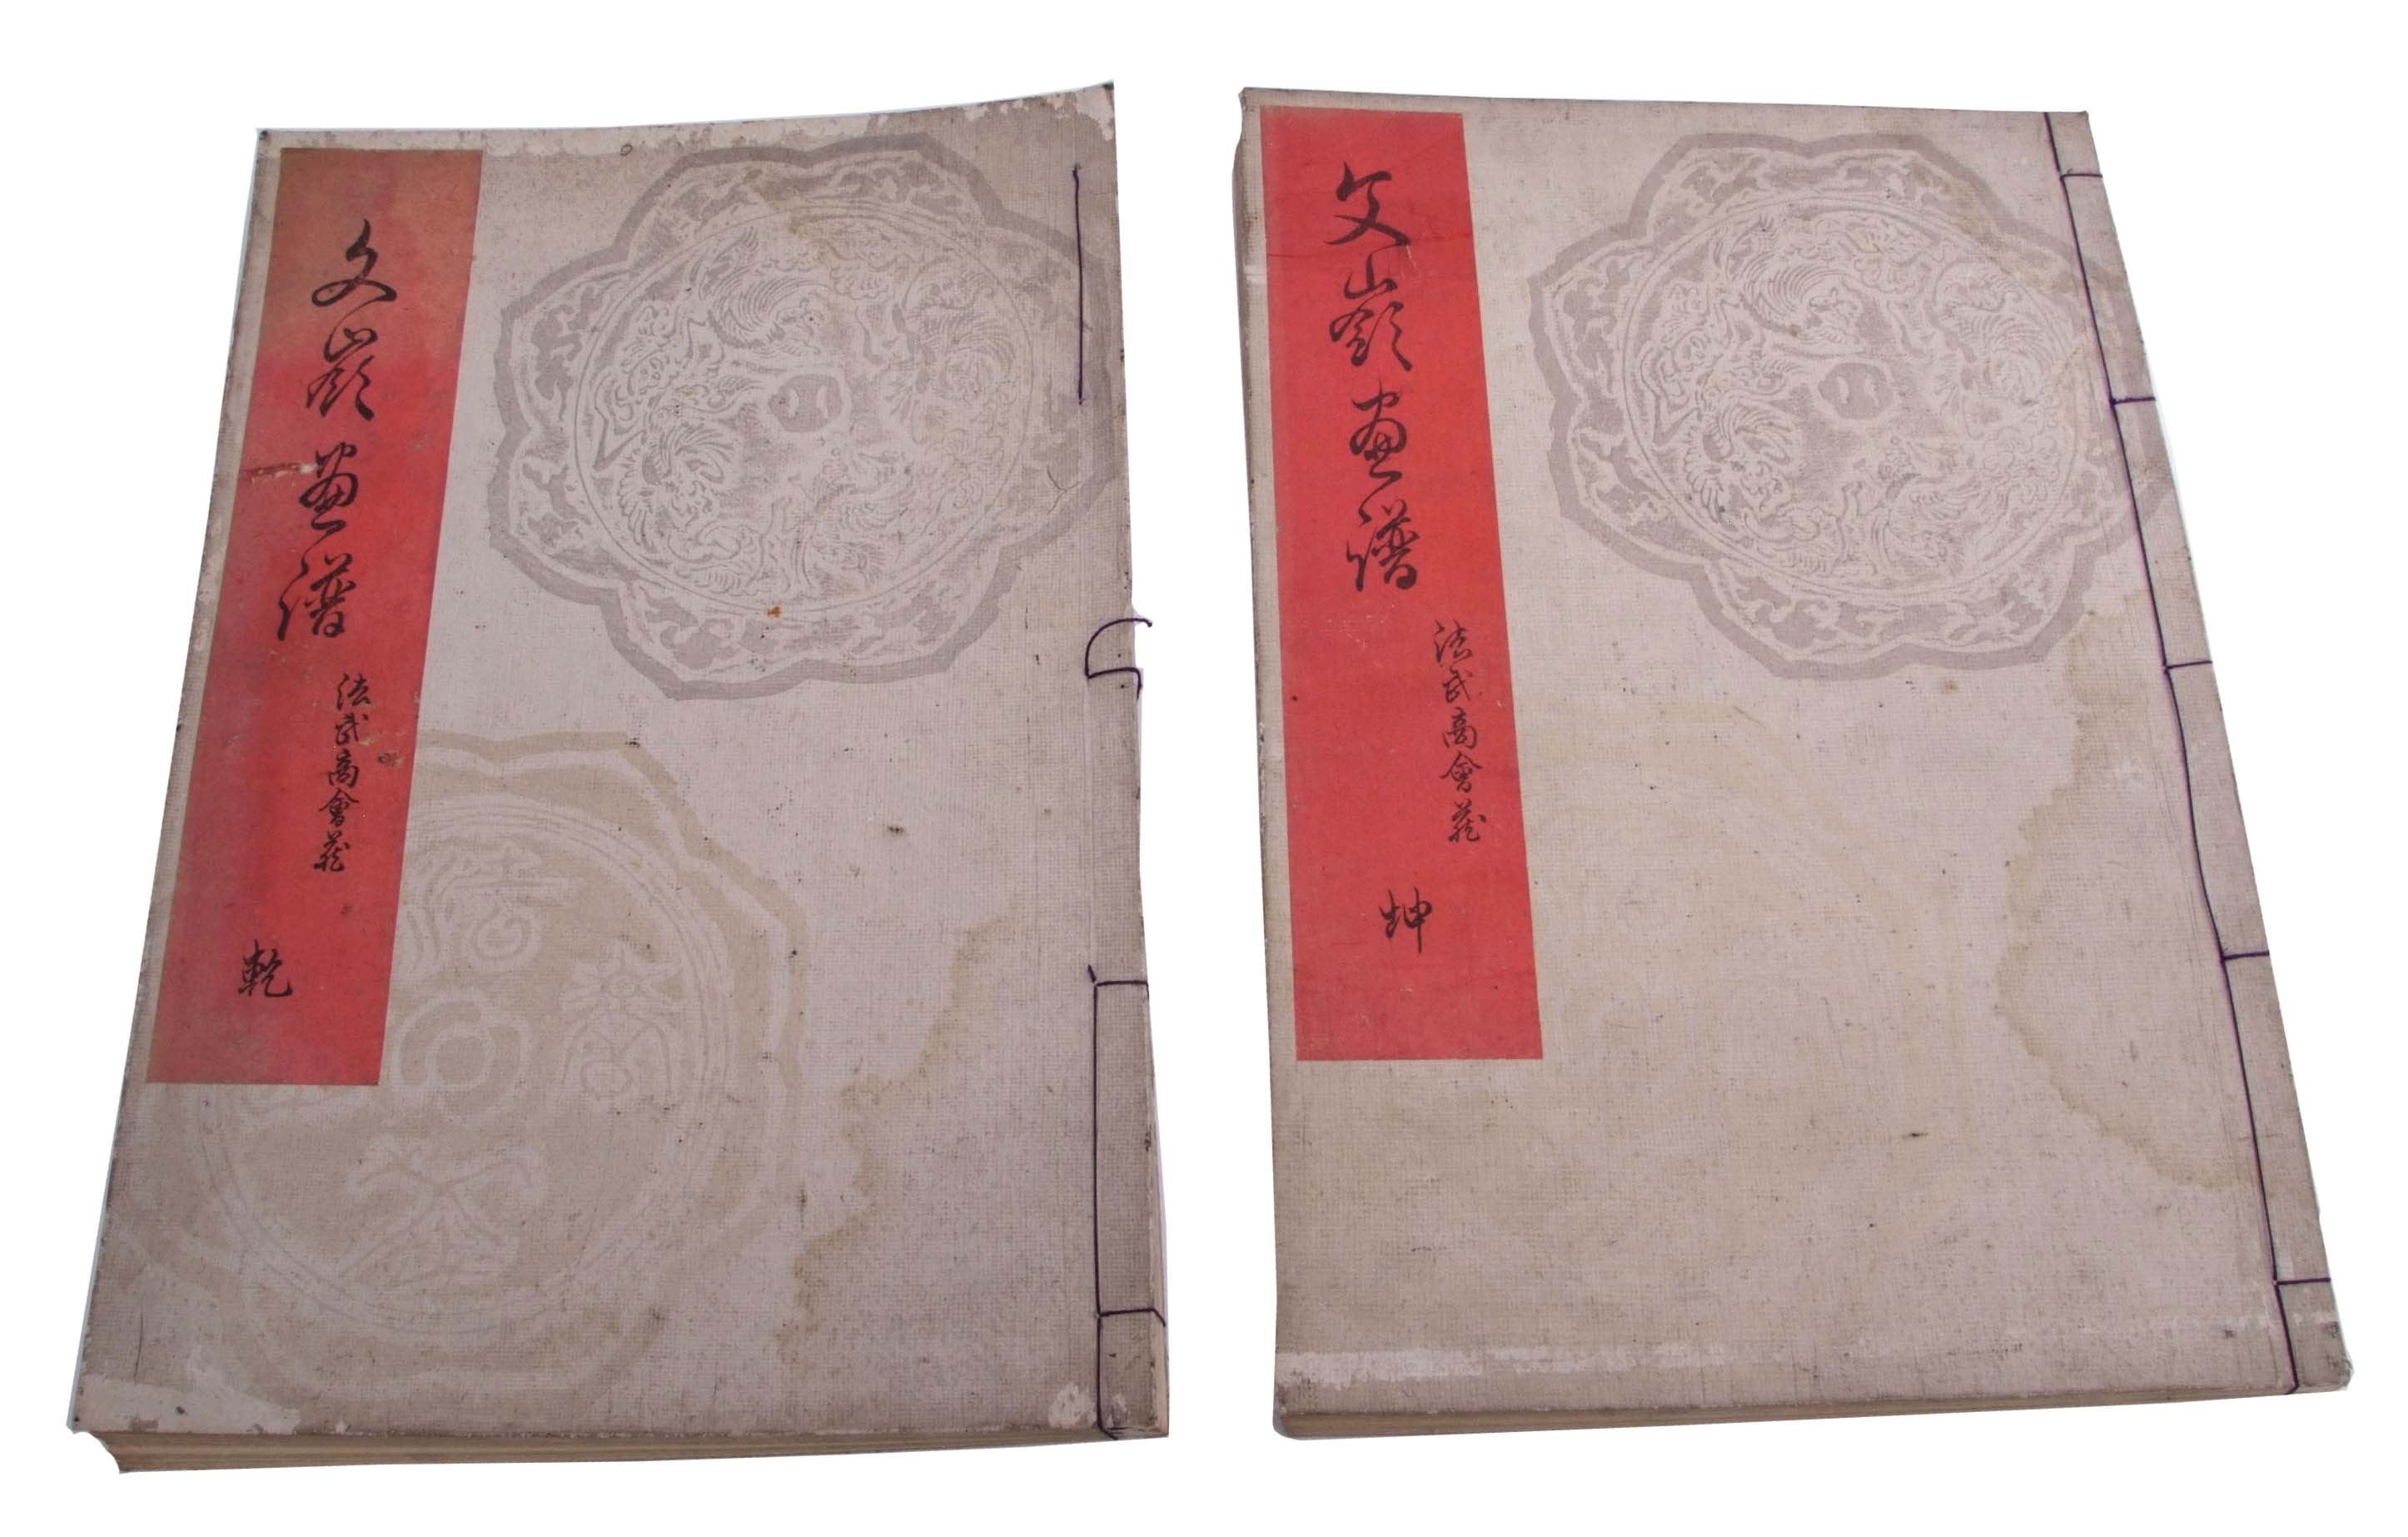 Two Japanese sketchbooks of woodblock prints, one mainly of birds and cranes in floral settings or - Image 6 of 6